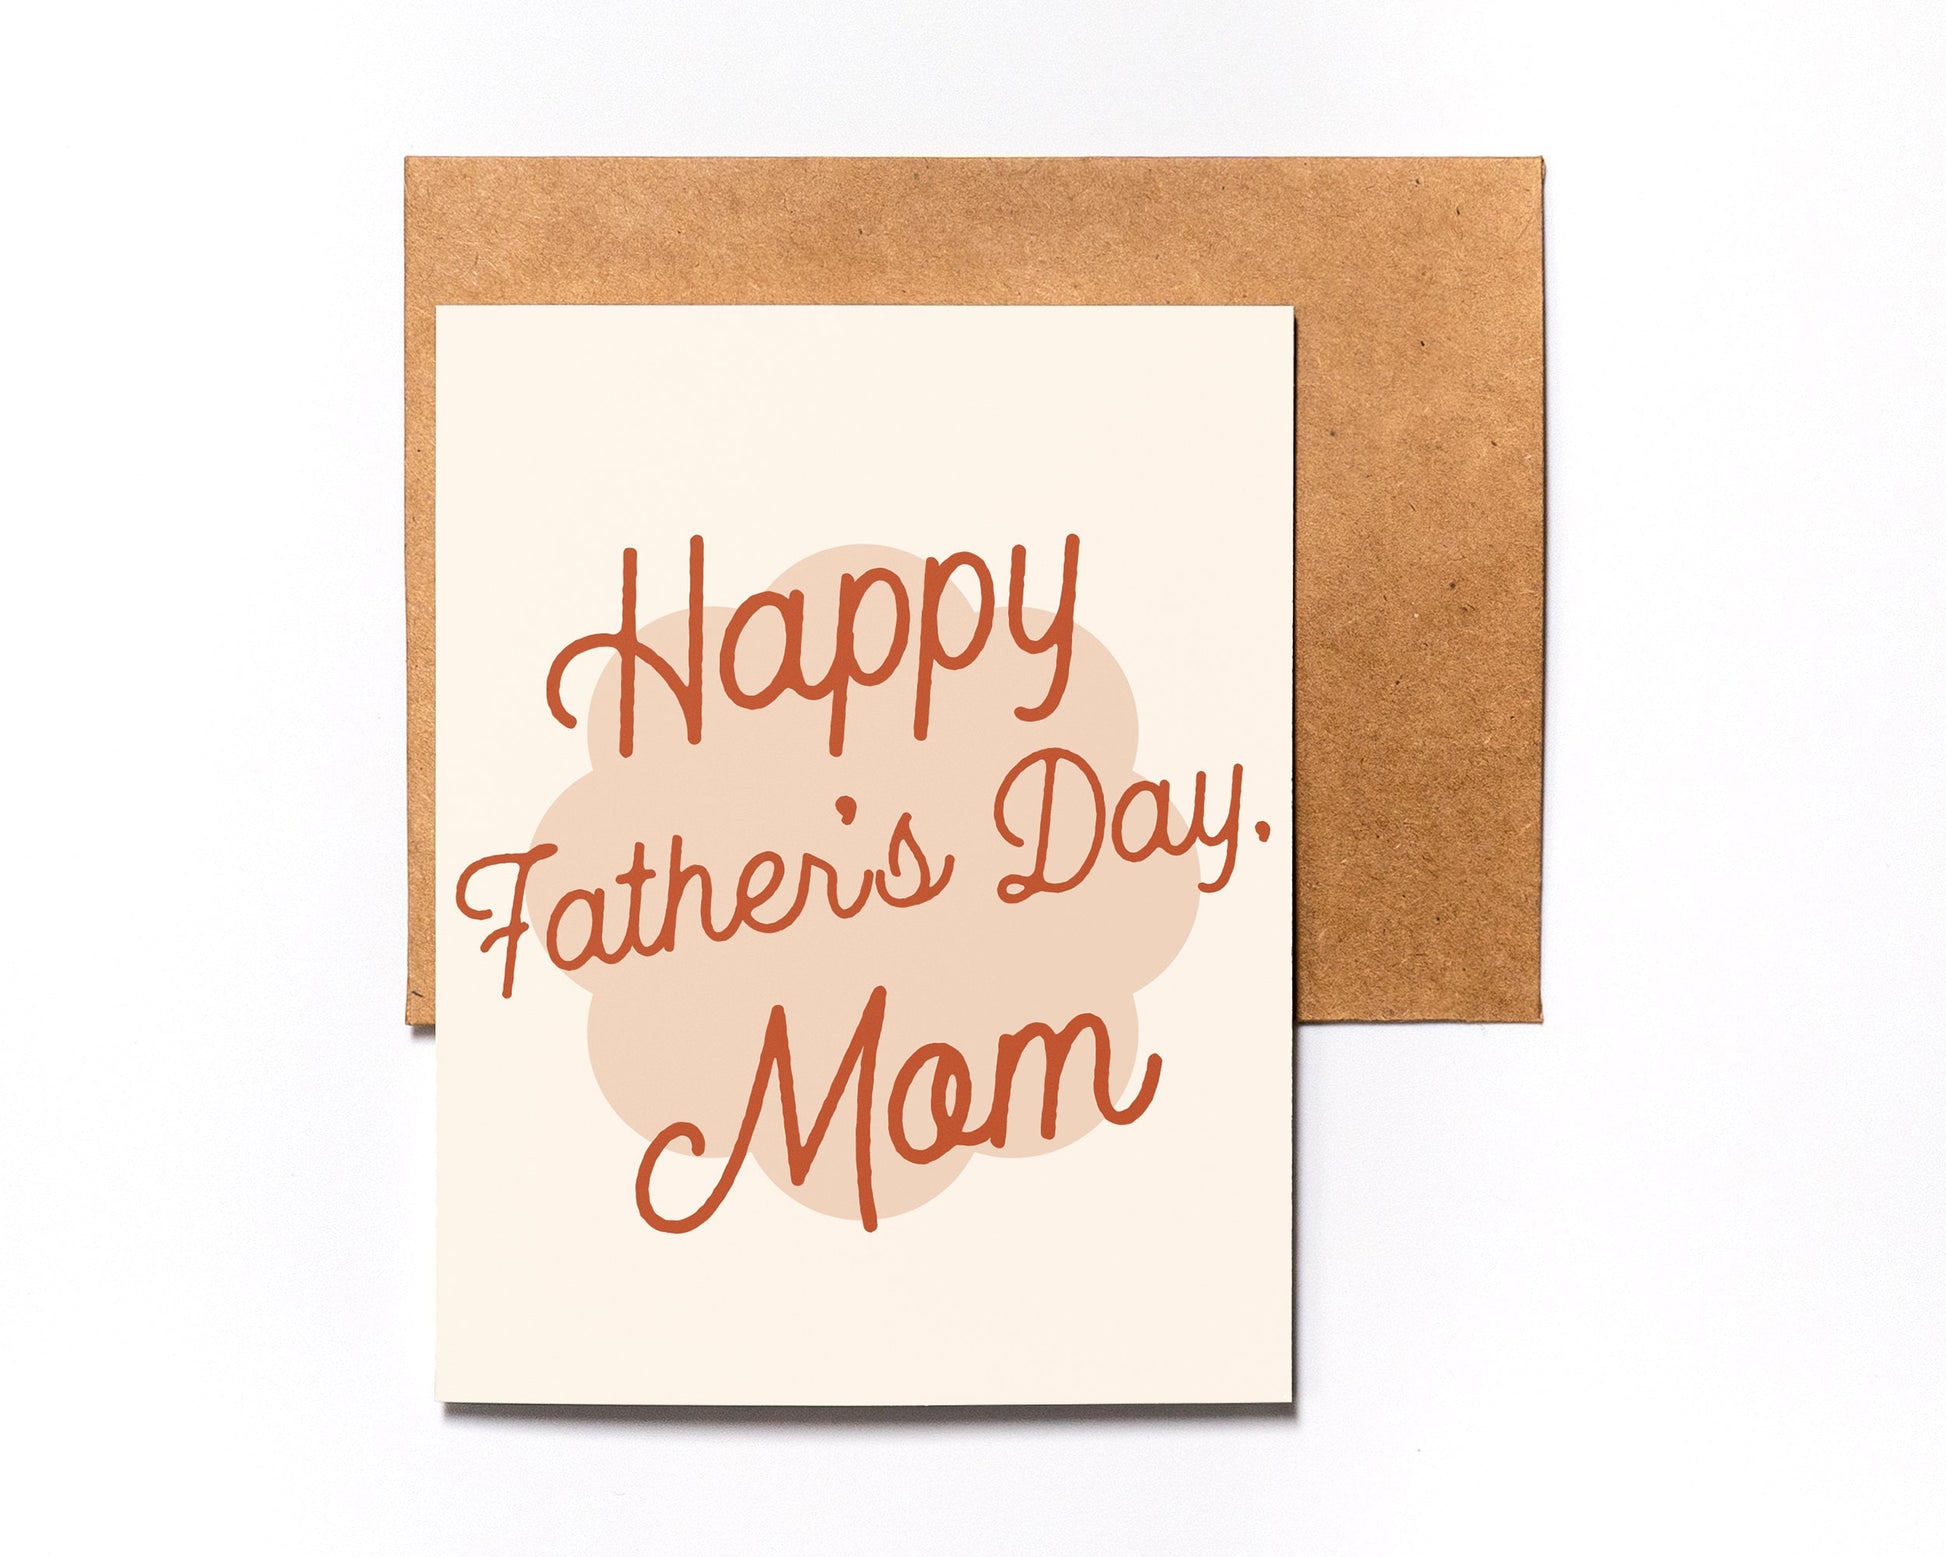 Father's Day Card For Mom | Happy Fathers Day Mom - To Mom - From Kid - Father Figure - Father's Day Gift Ideas - Single Parent